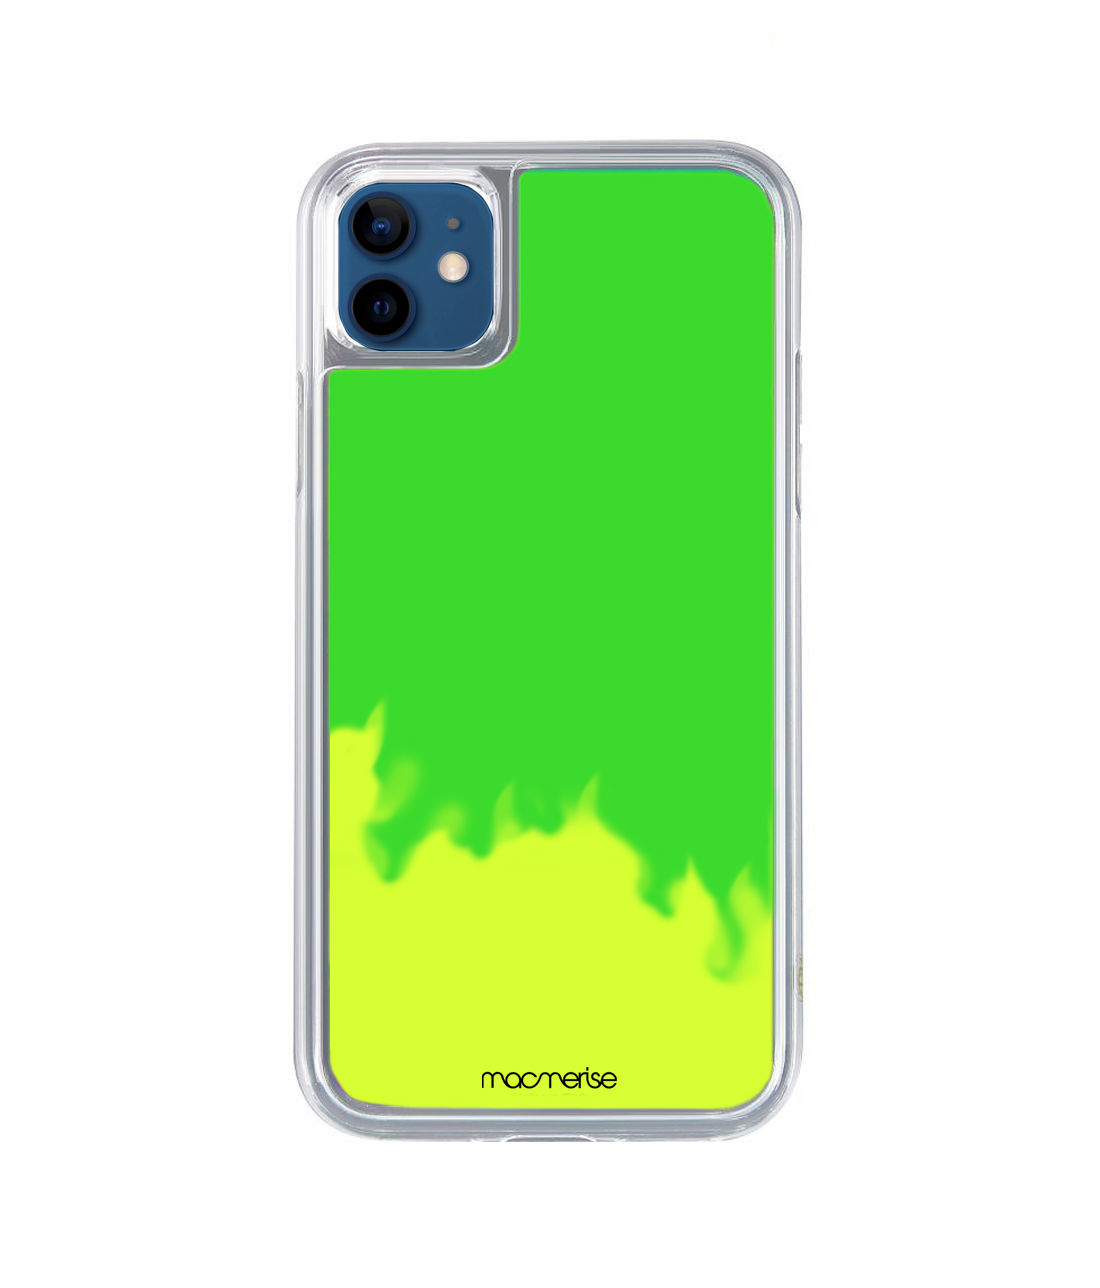 Neon Sand Green - Neon Sand Case for iPhone 12 Mini